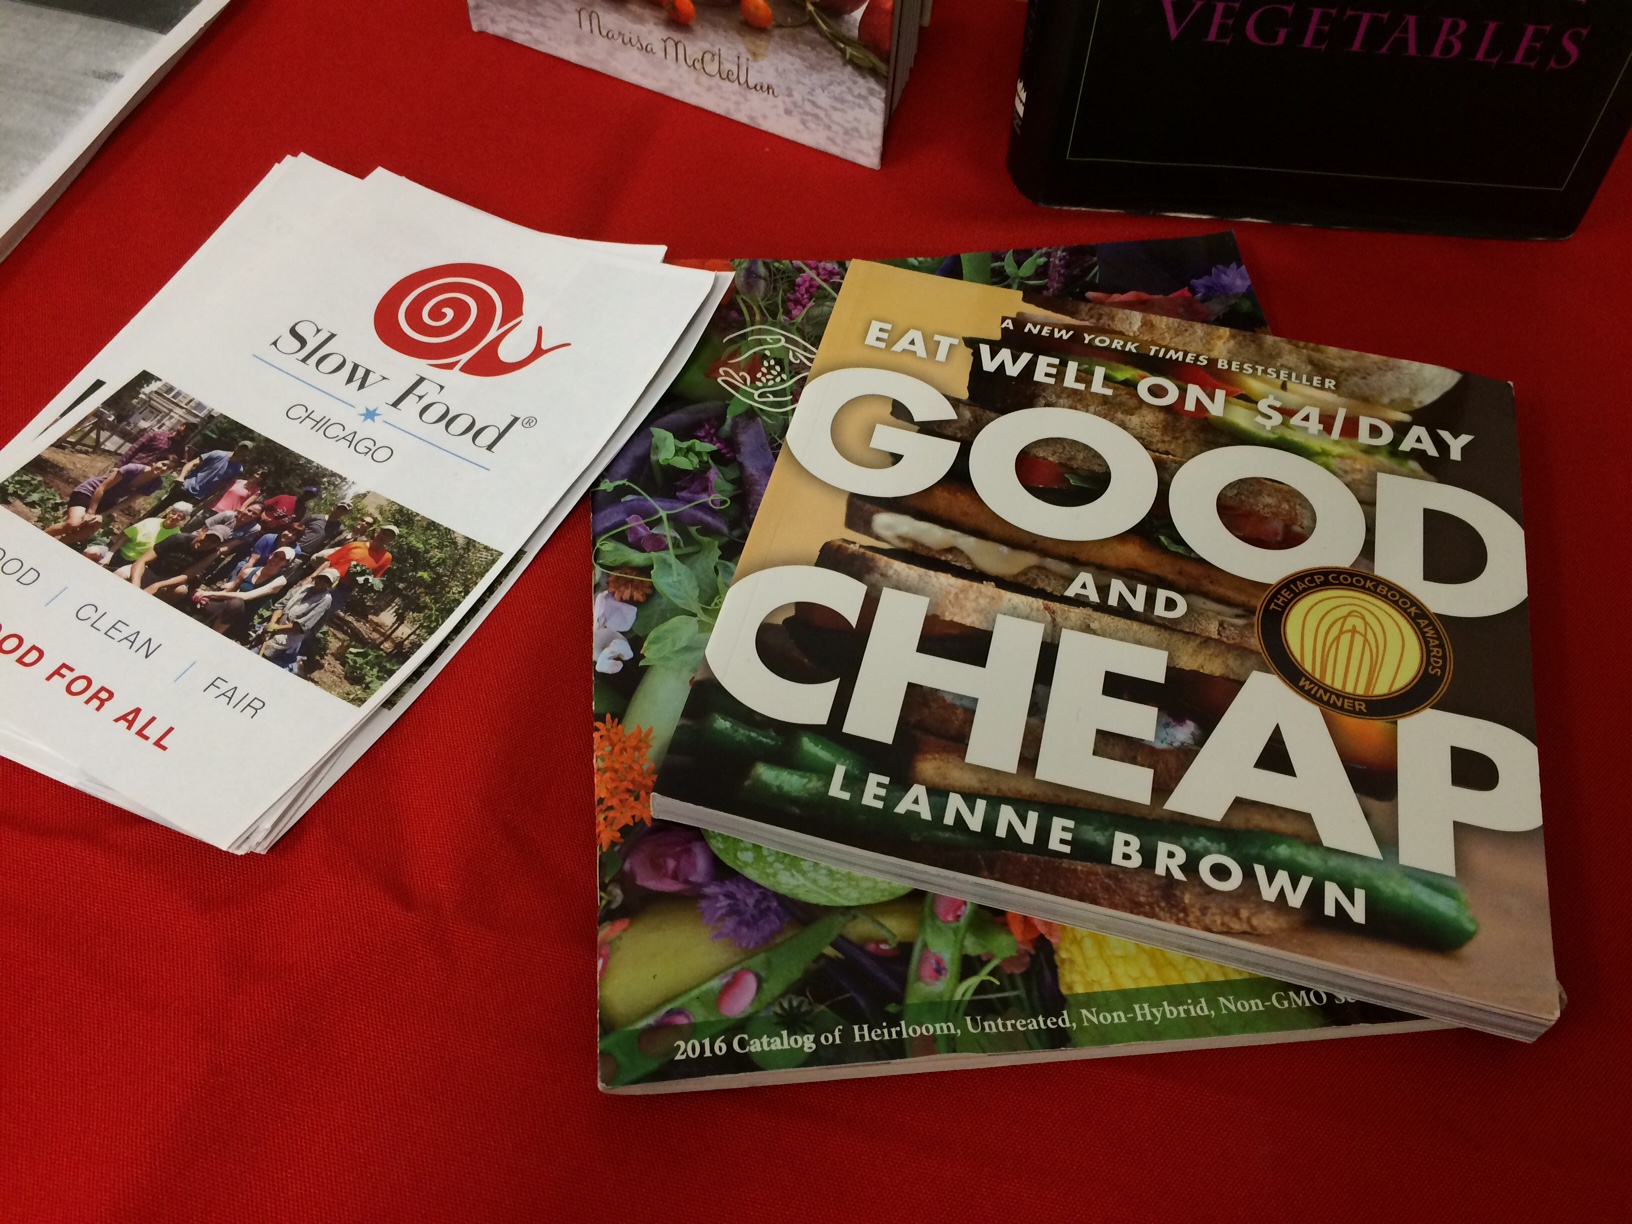  Resource table - including Leanne Brown's Good and Cheap : Eating Well on $4/Day. 